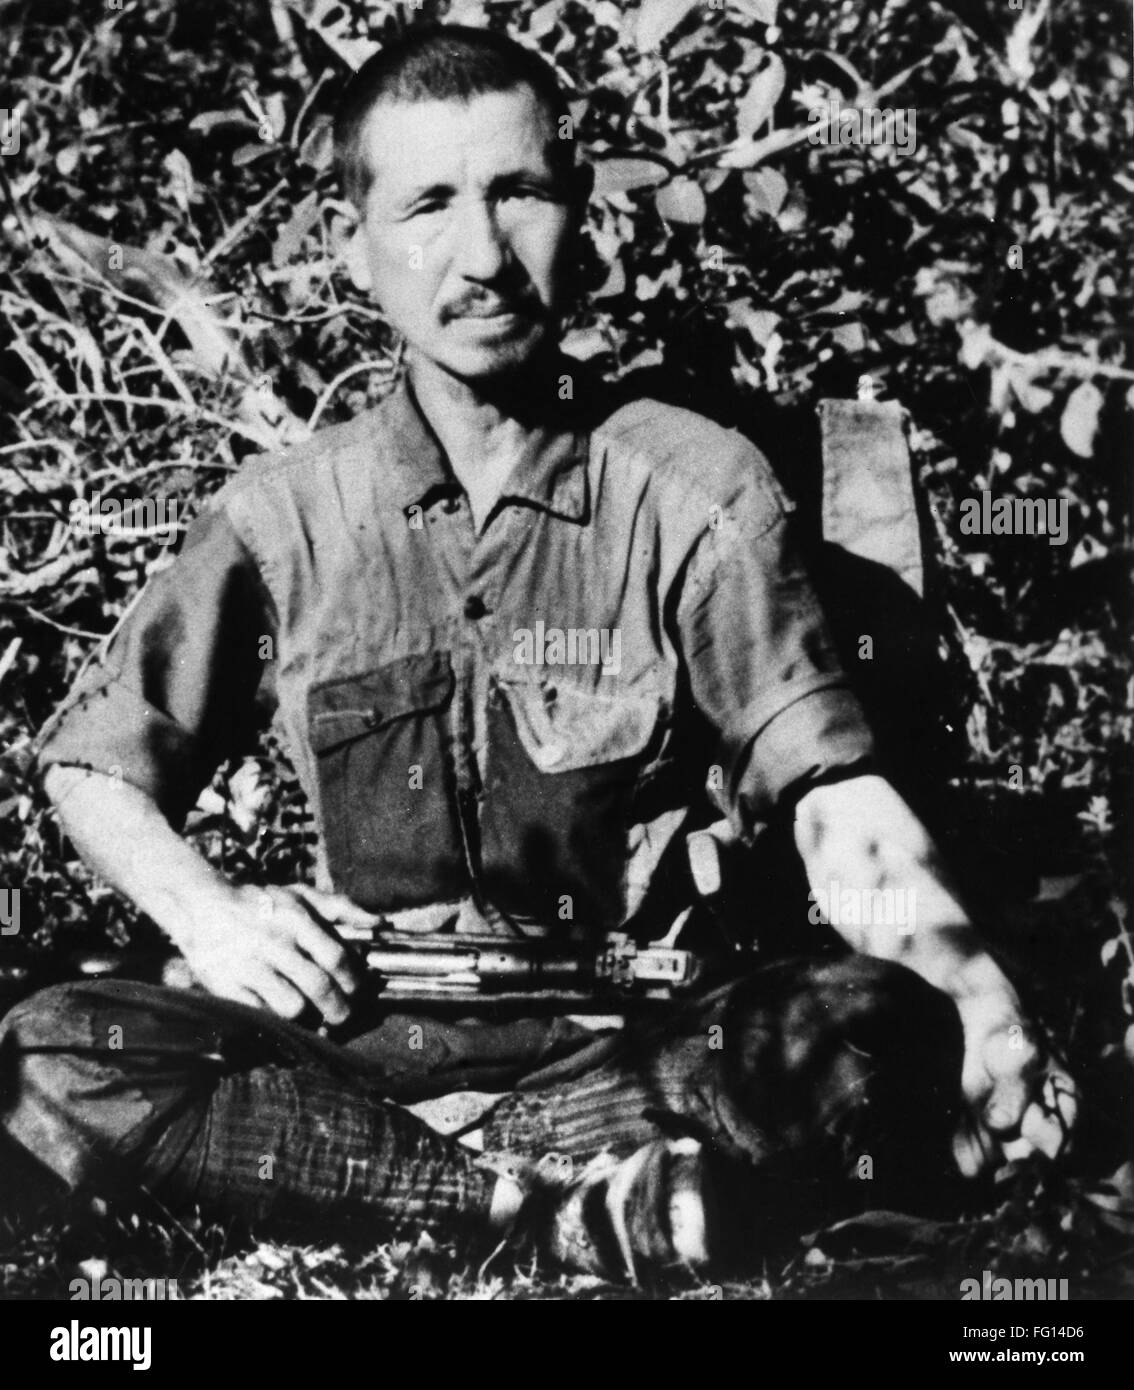 HIROO ONODA (1922-2014). /nJapanese army officer during World War II, who did not surrender until 1974. Photograph, 1974. Stock Photo